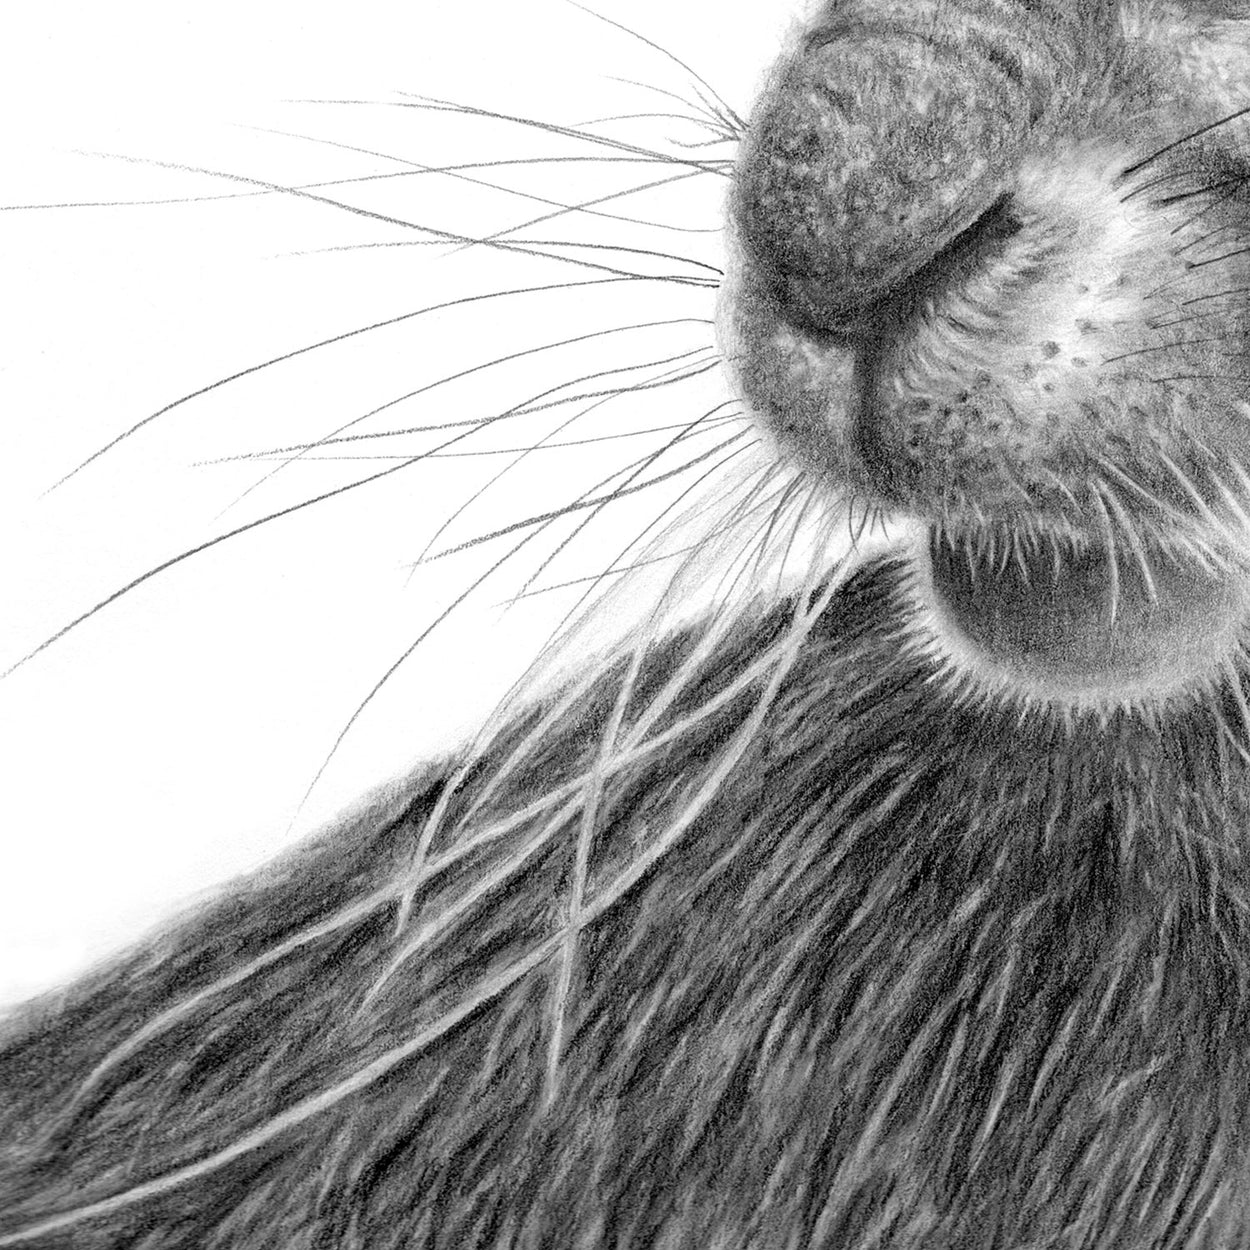 Hare Drawing Nose Close-up 1 - The Thriving Wild